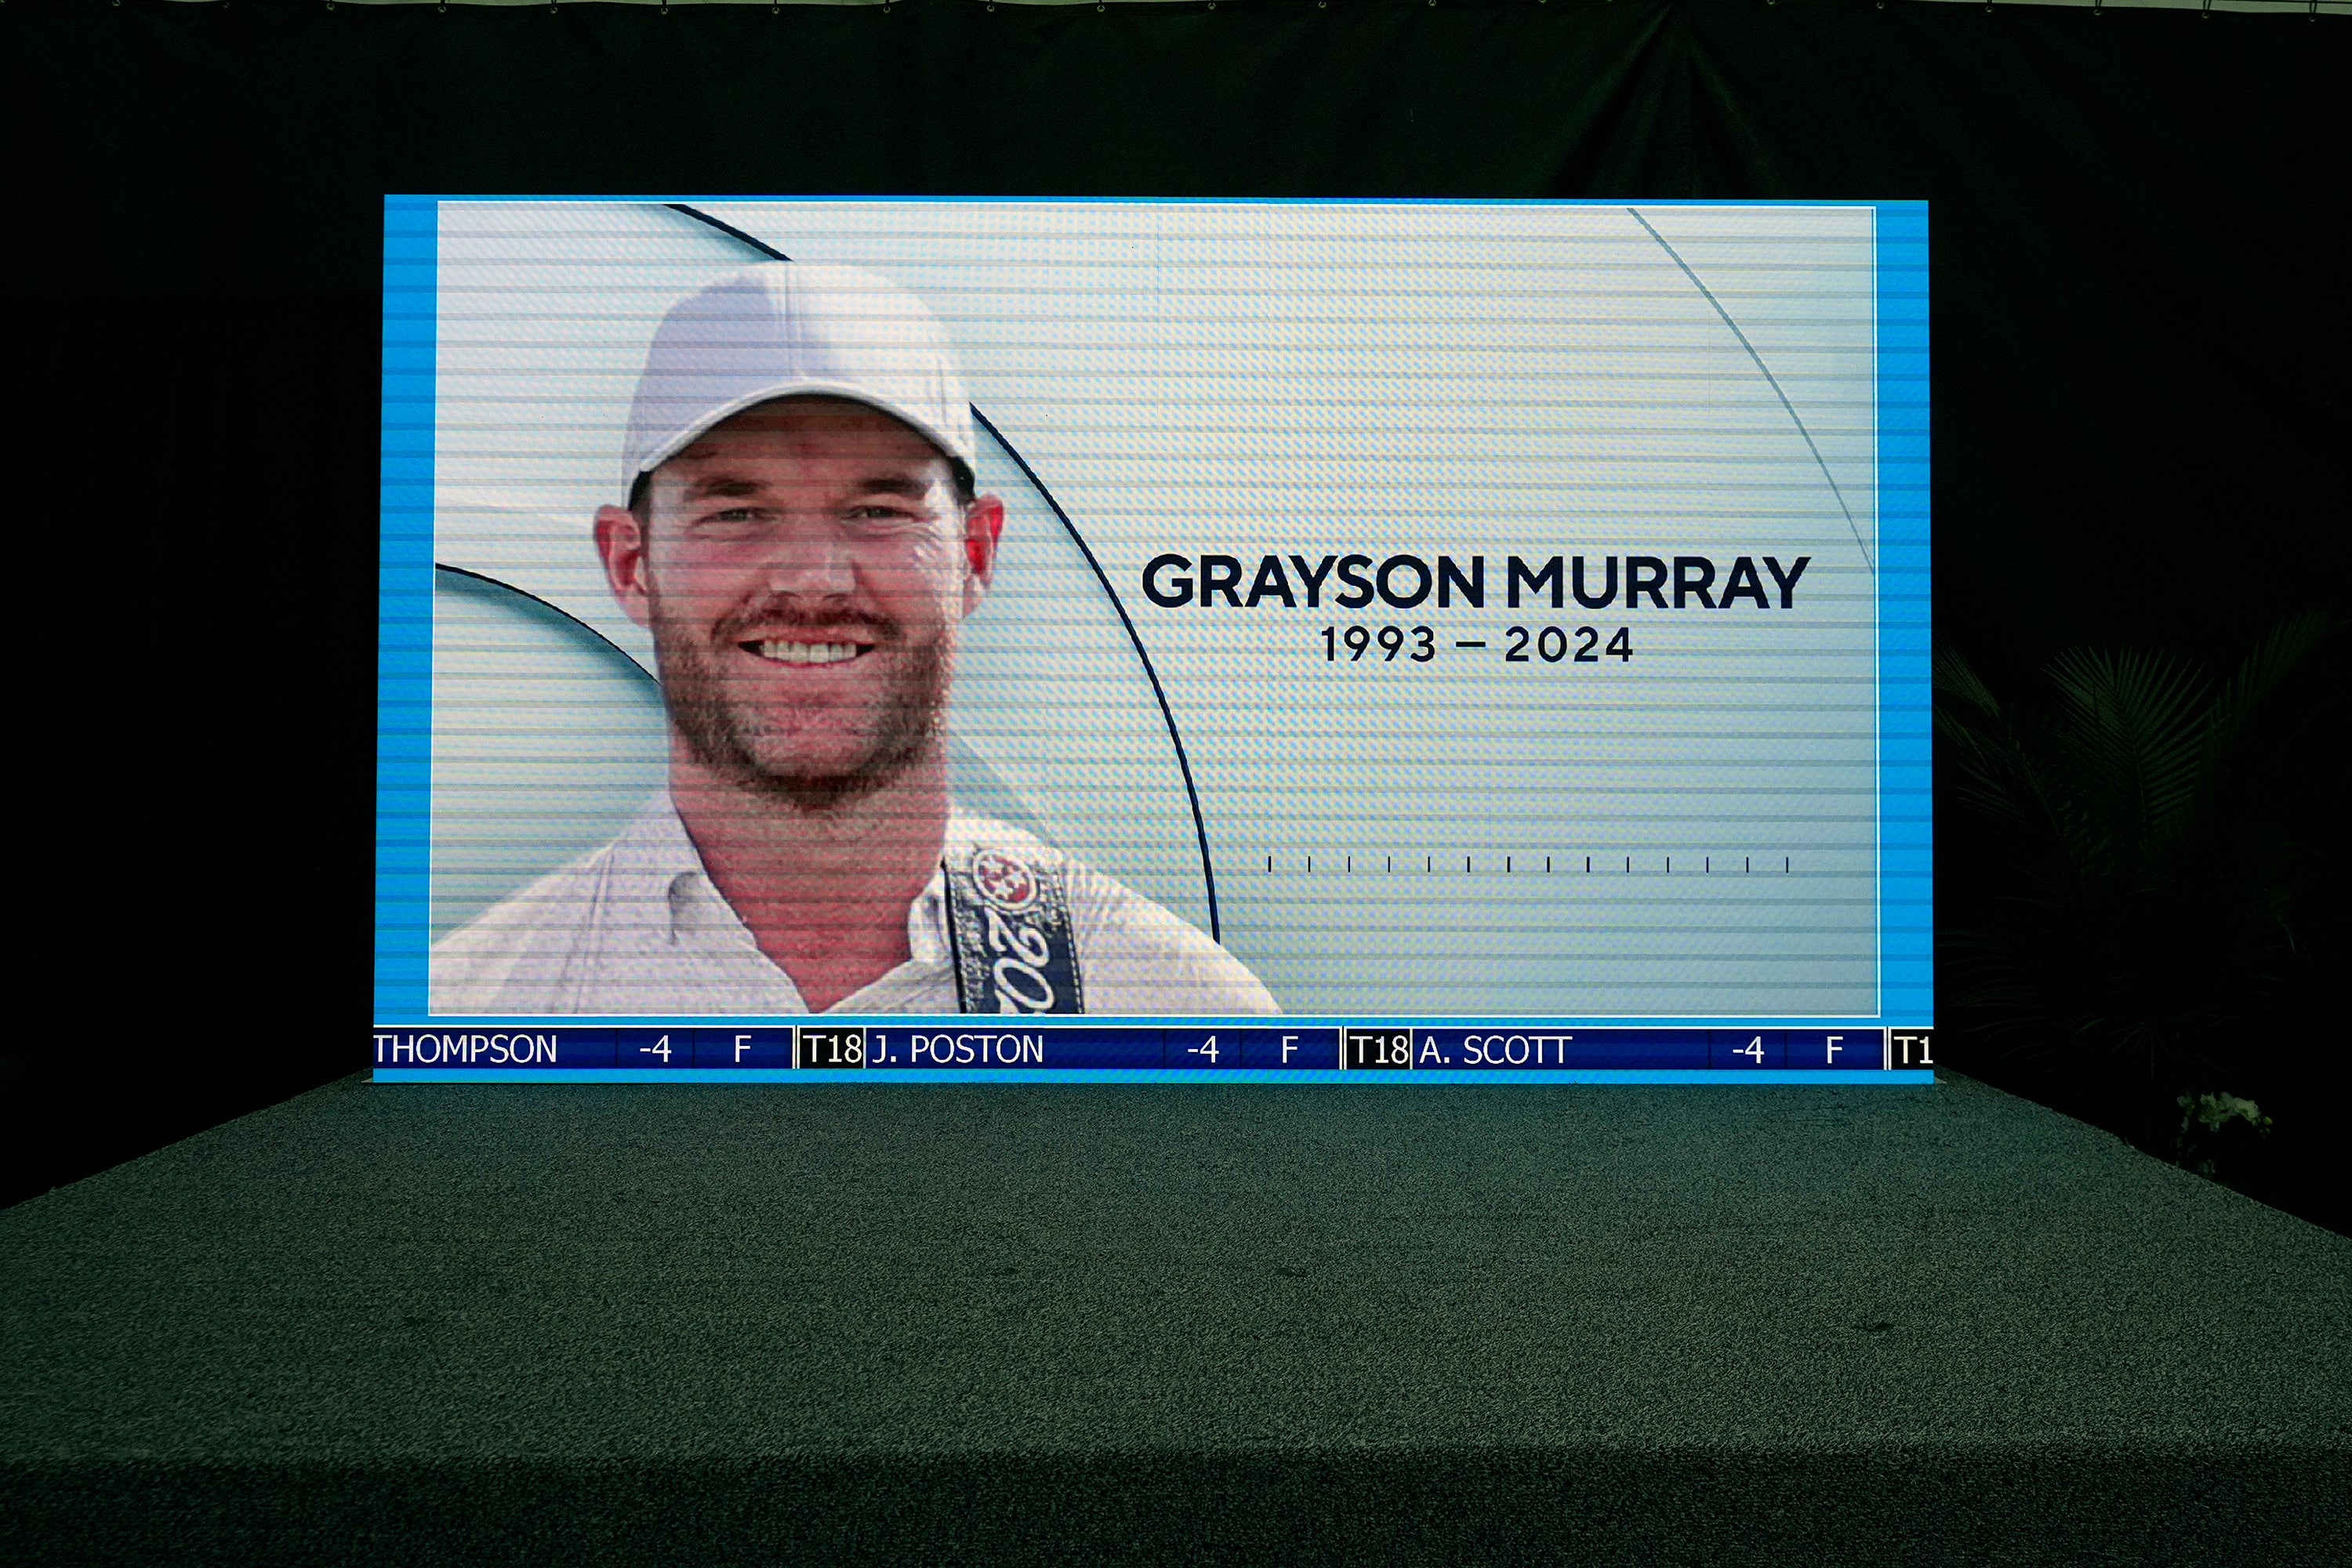 A golf broadcast by CBS is played on an empty stage at the media center showing a photo of Grayson Murray qhiquqidqhiqurinv